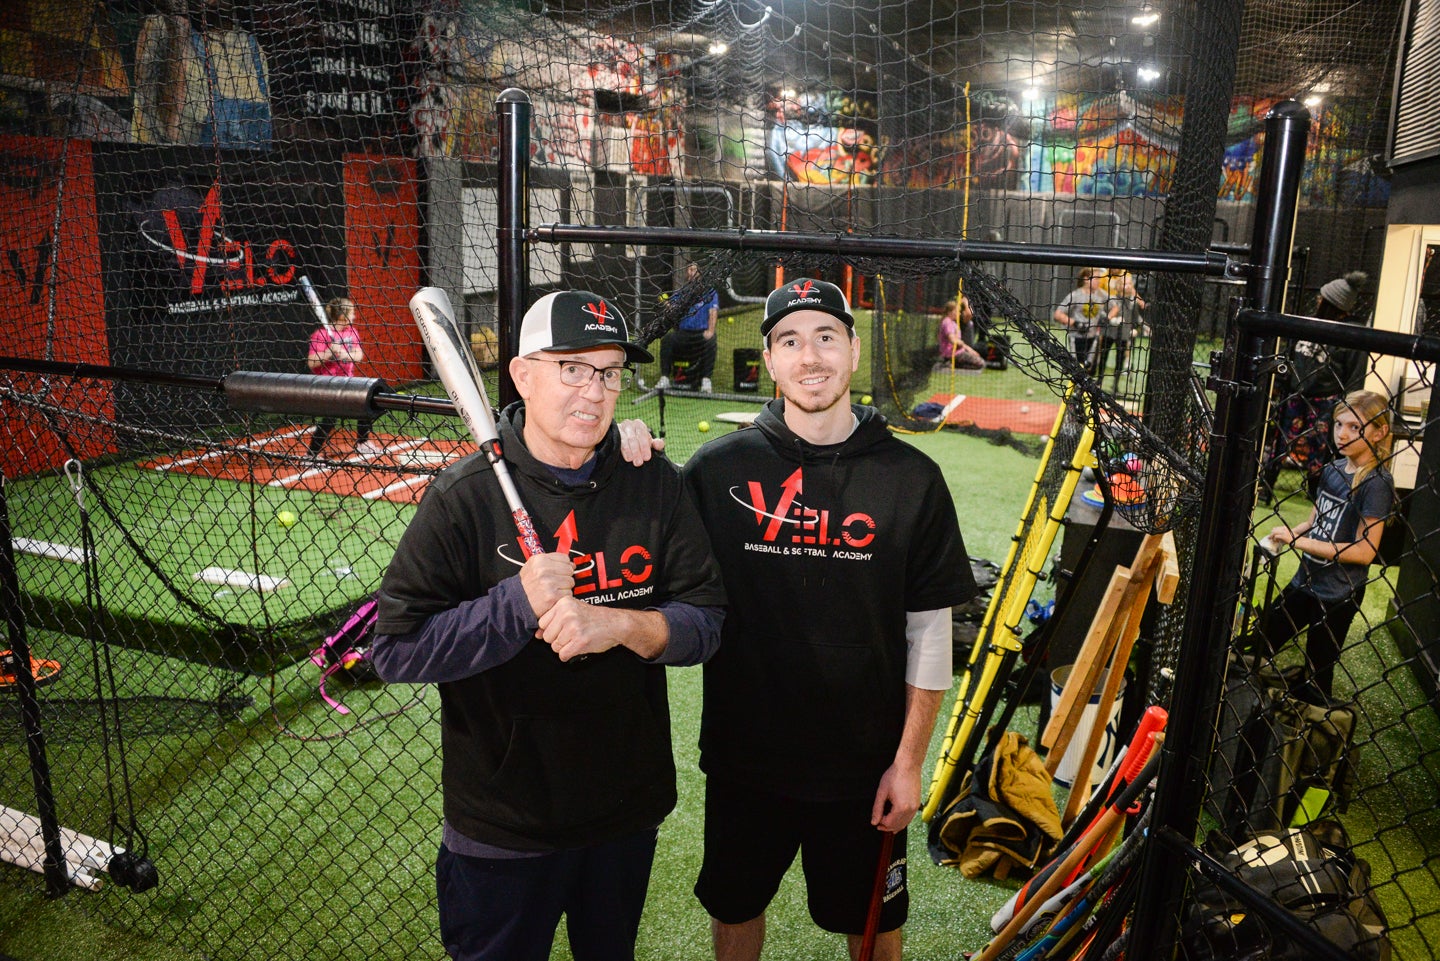 ‘If you build it, they will come’: Father and son duo open baseball, softball training facility